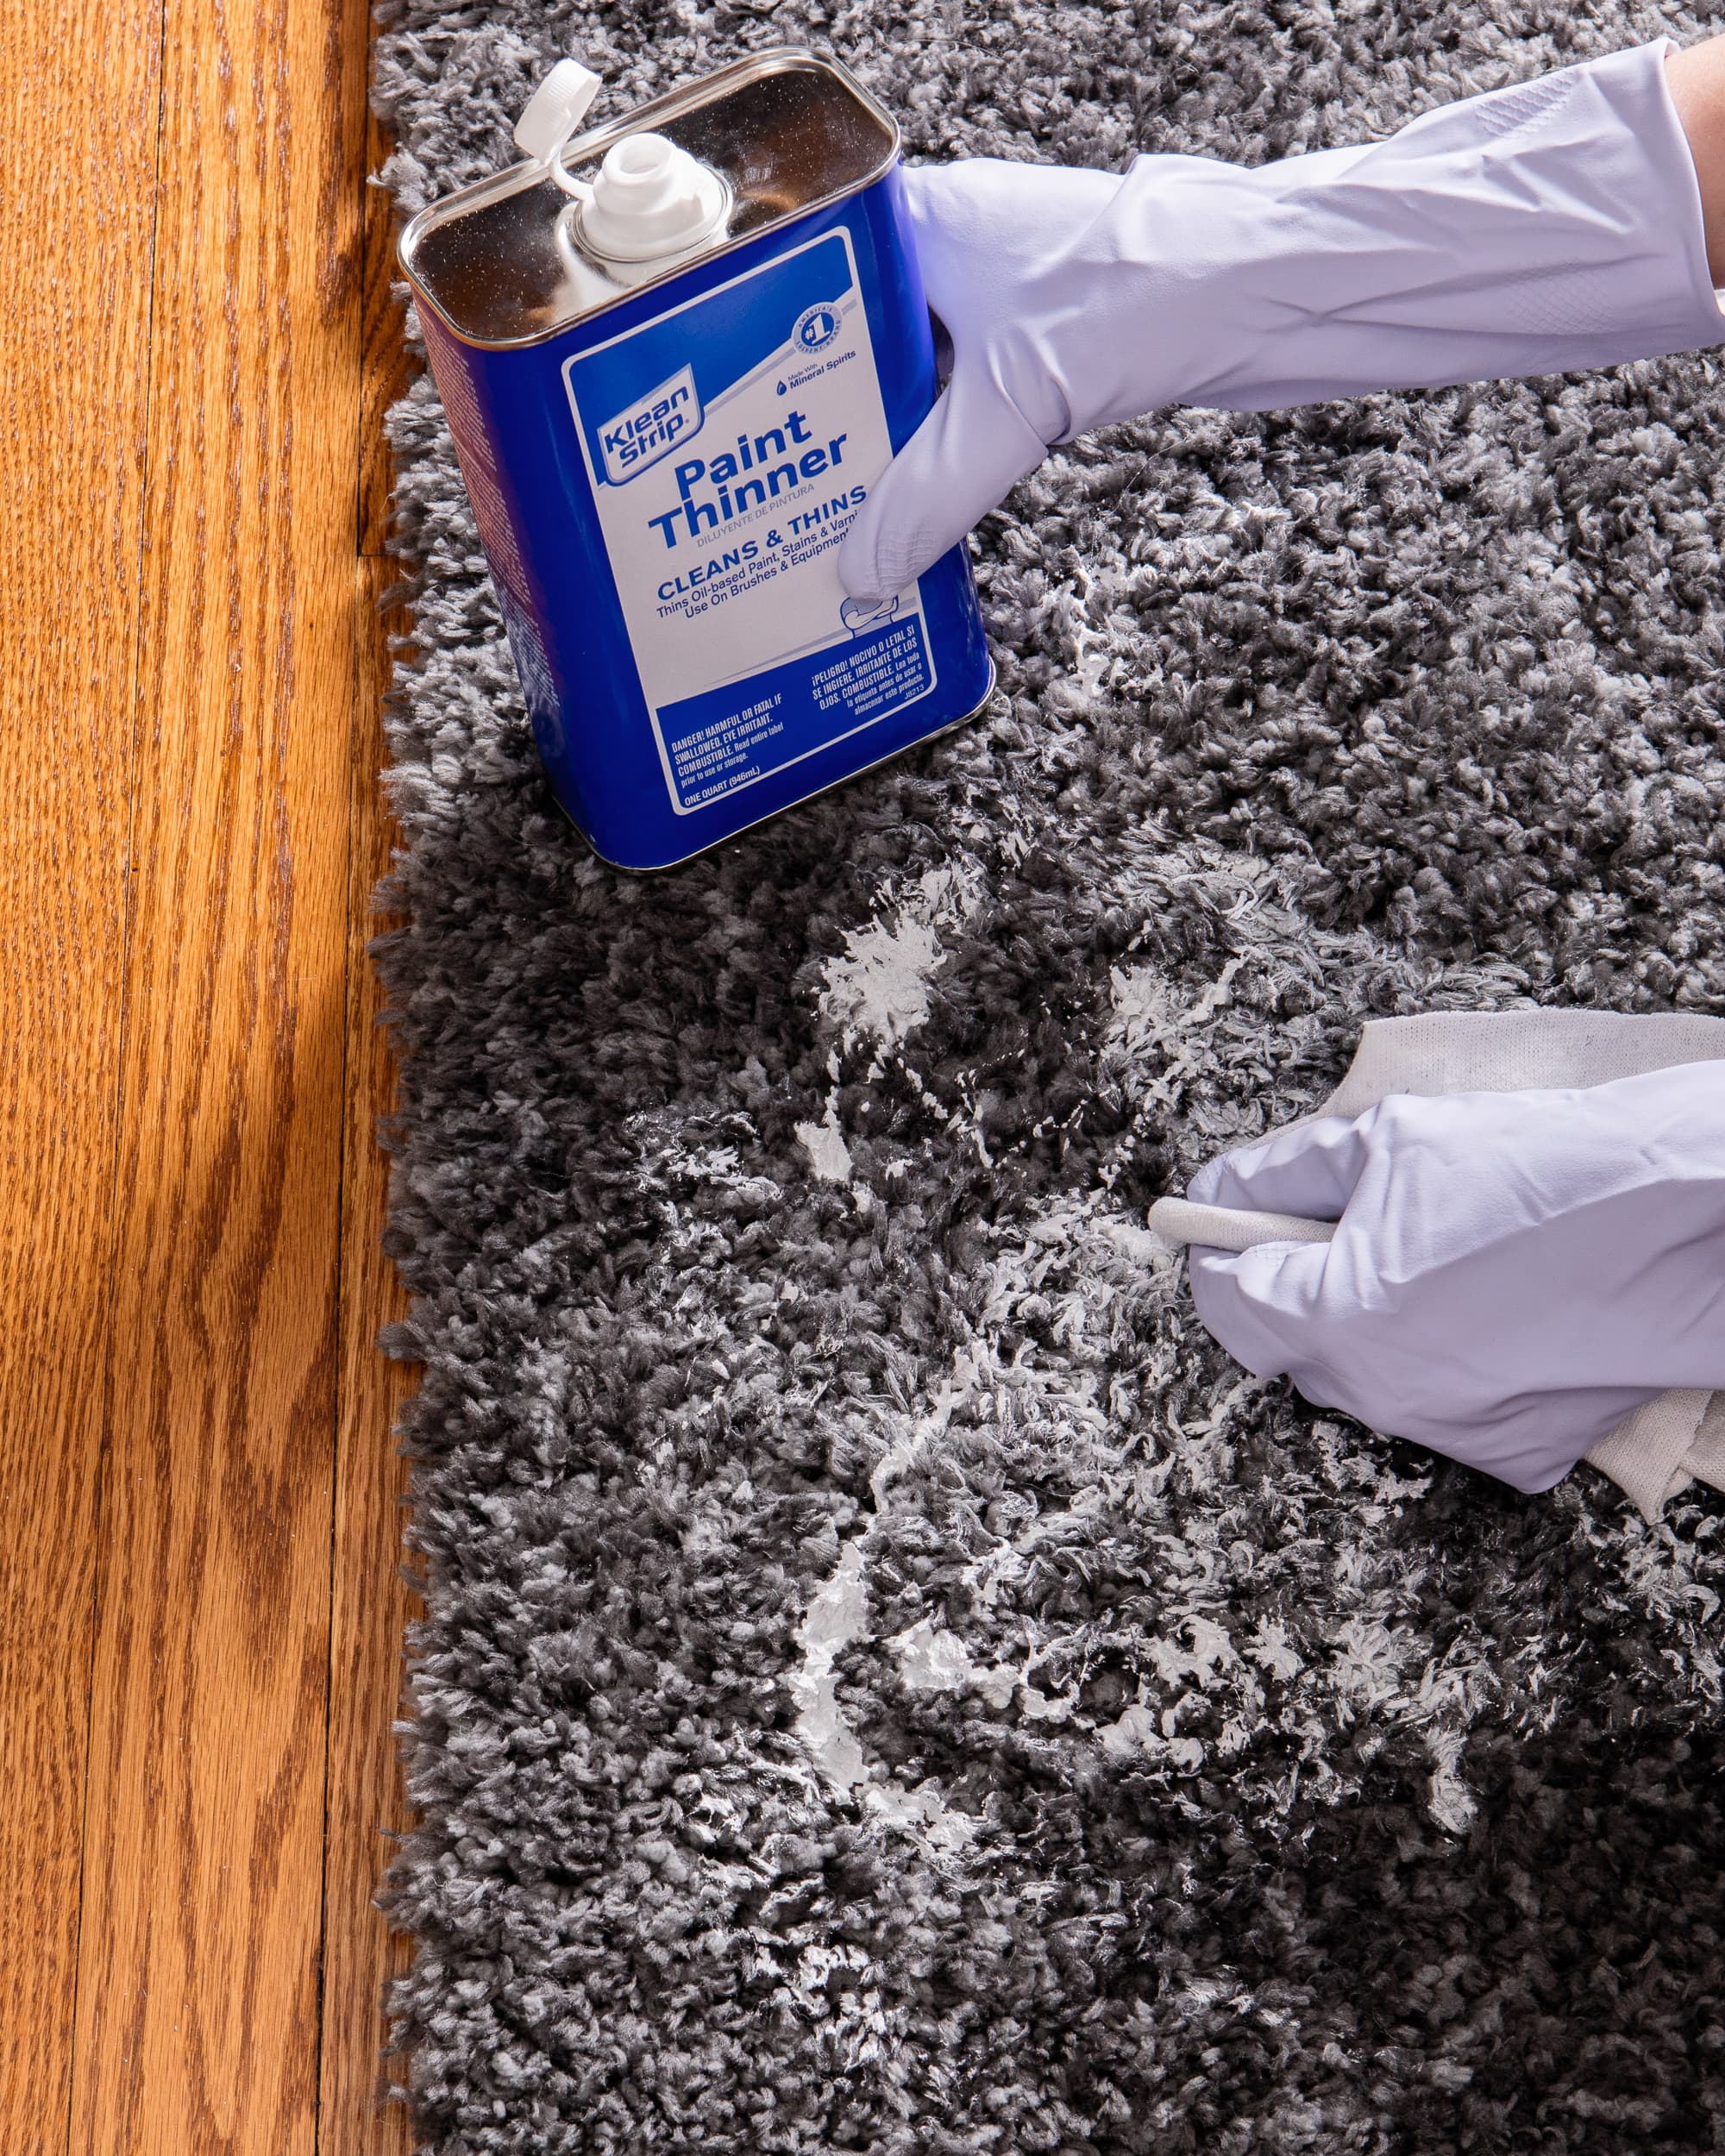 How to Get Paint Out of Carpet - 29 Ways to Remove Paint Stains